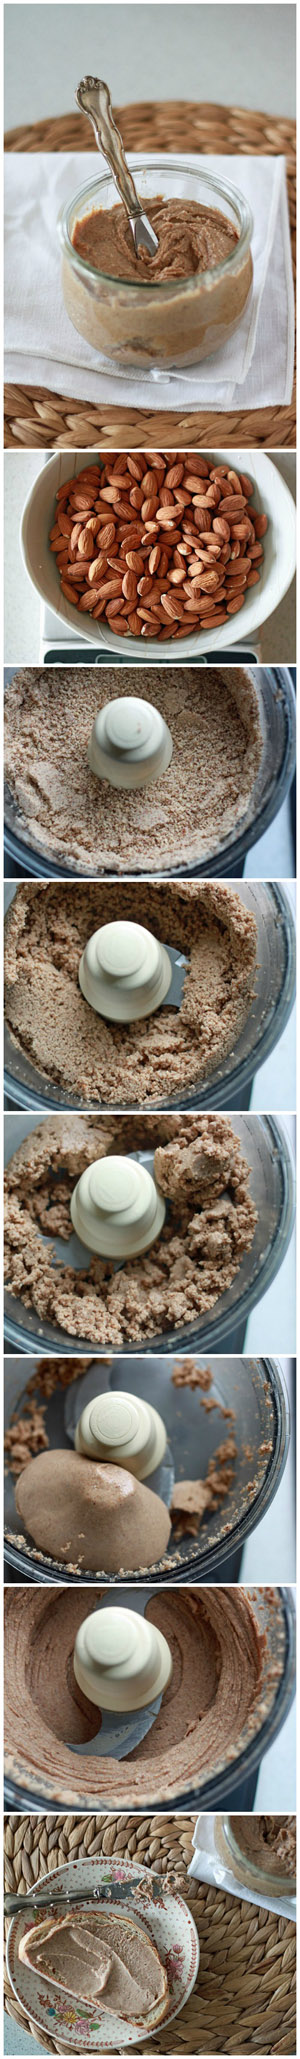 How to Make Almond Butter | kitchentreaty.com